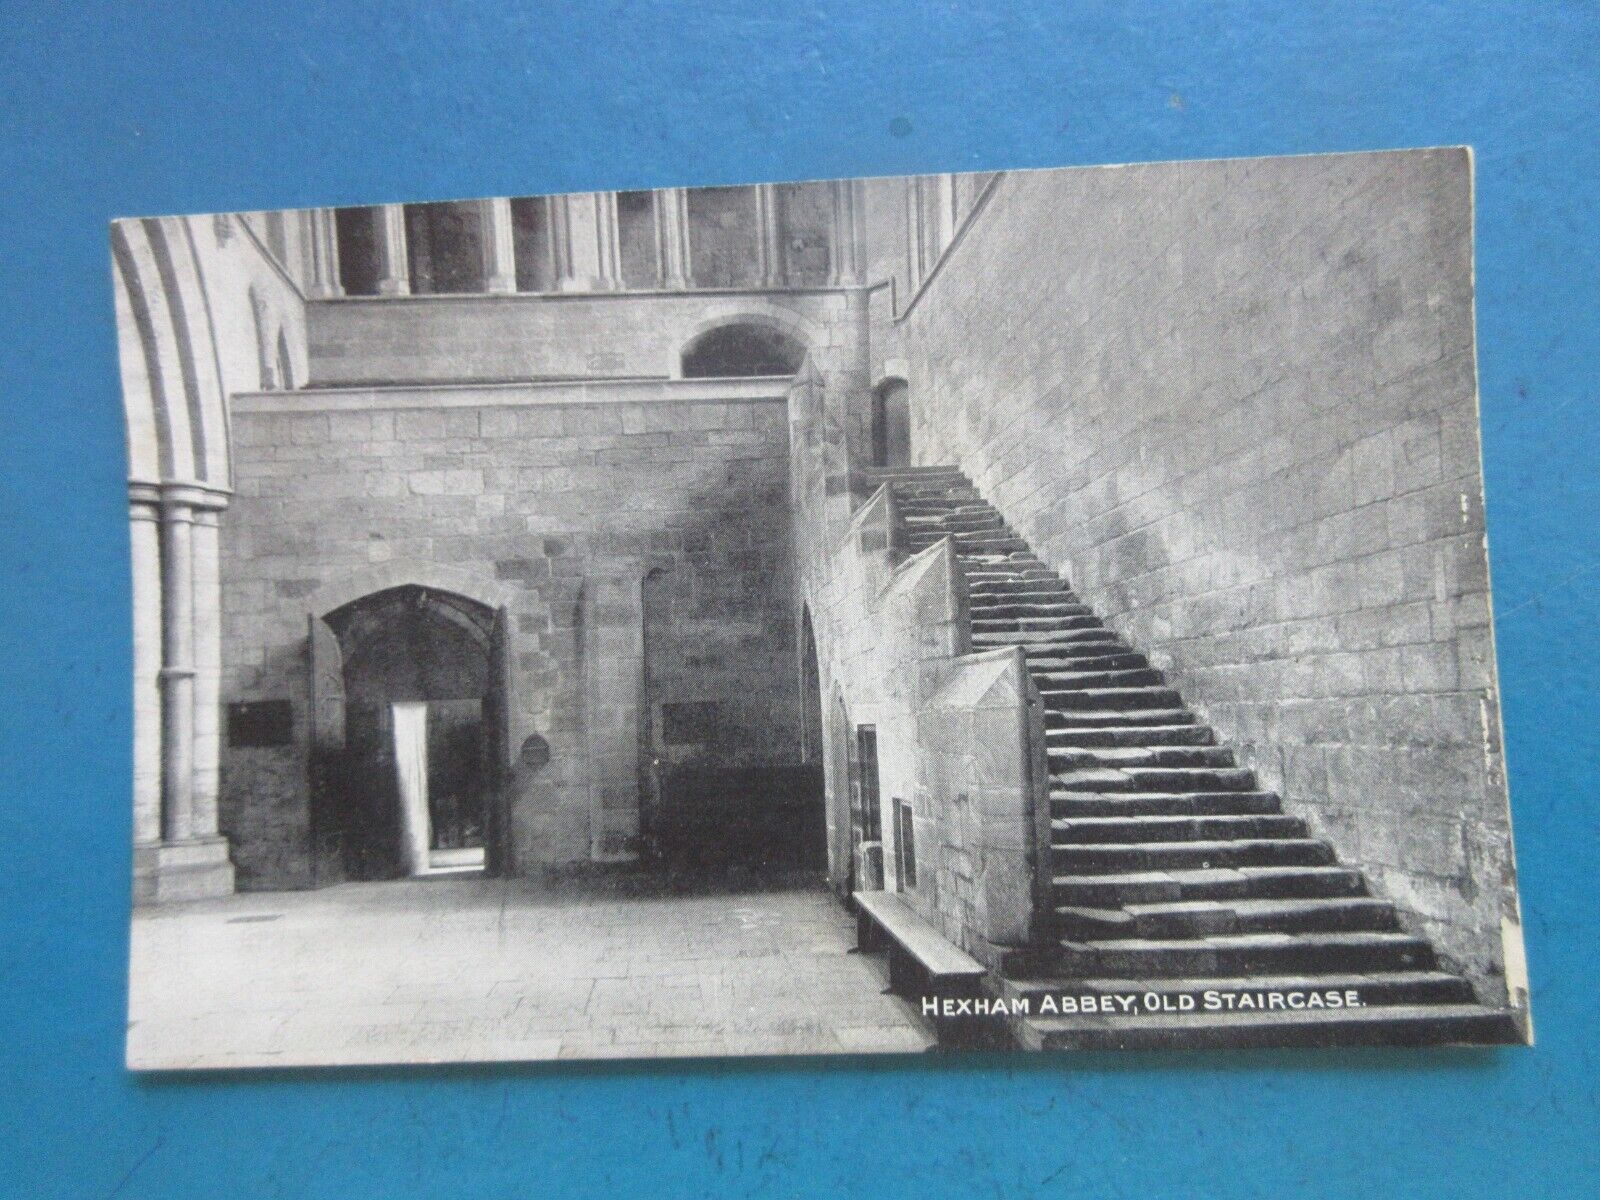 House Clearance - Old Service of Hexham Abbey, Old Staircase.